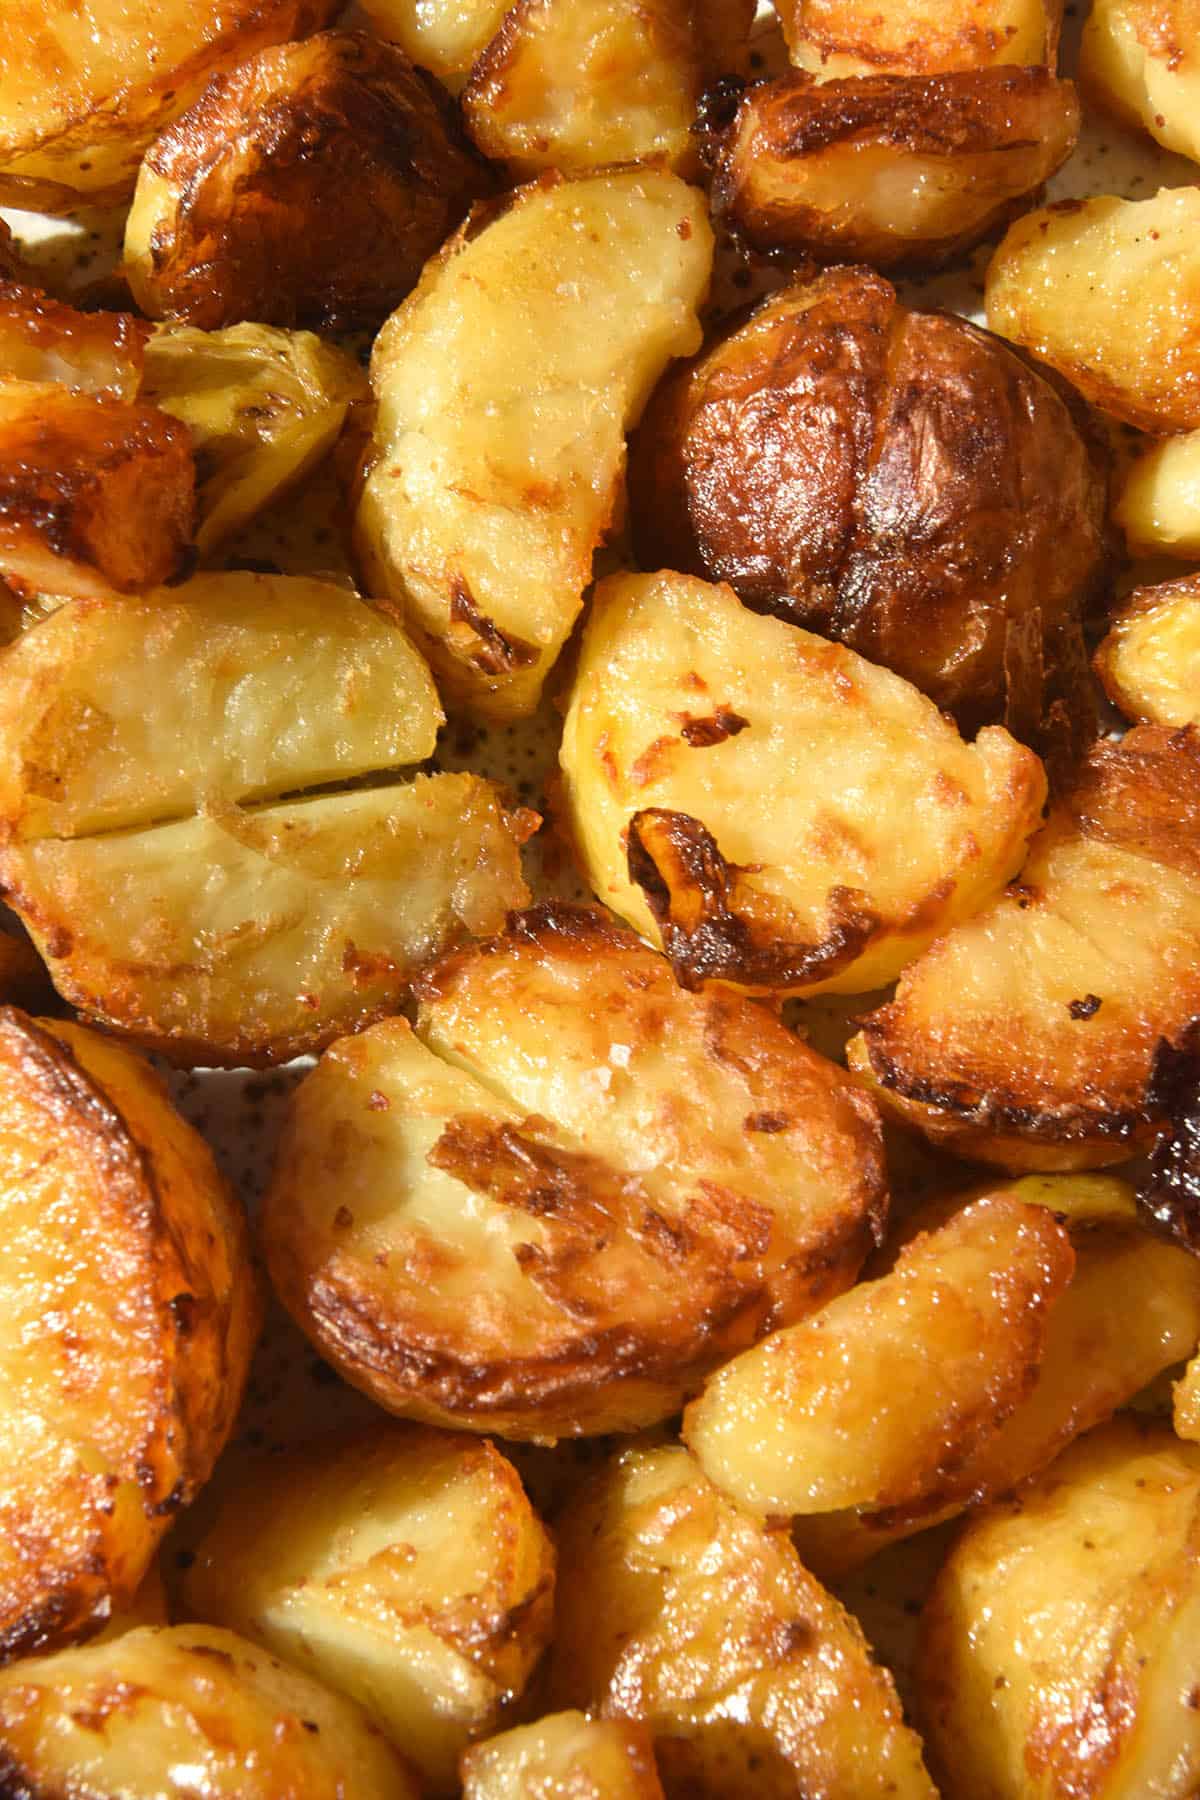 A close up aerial image of vegan roast potatoes on a white speckled ceramic plate. The potatoes are crispy, crunchy and golden brown in colour.